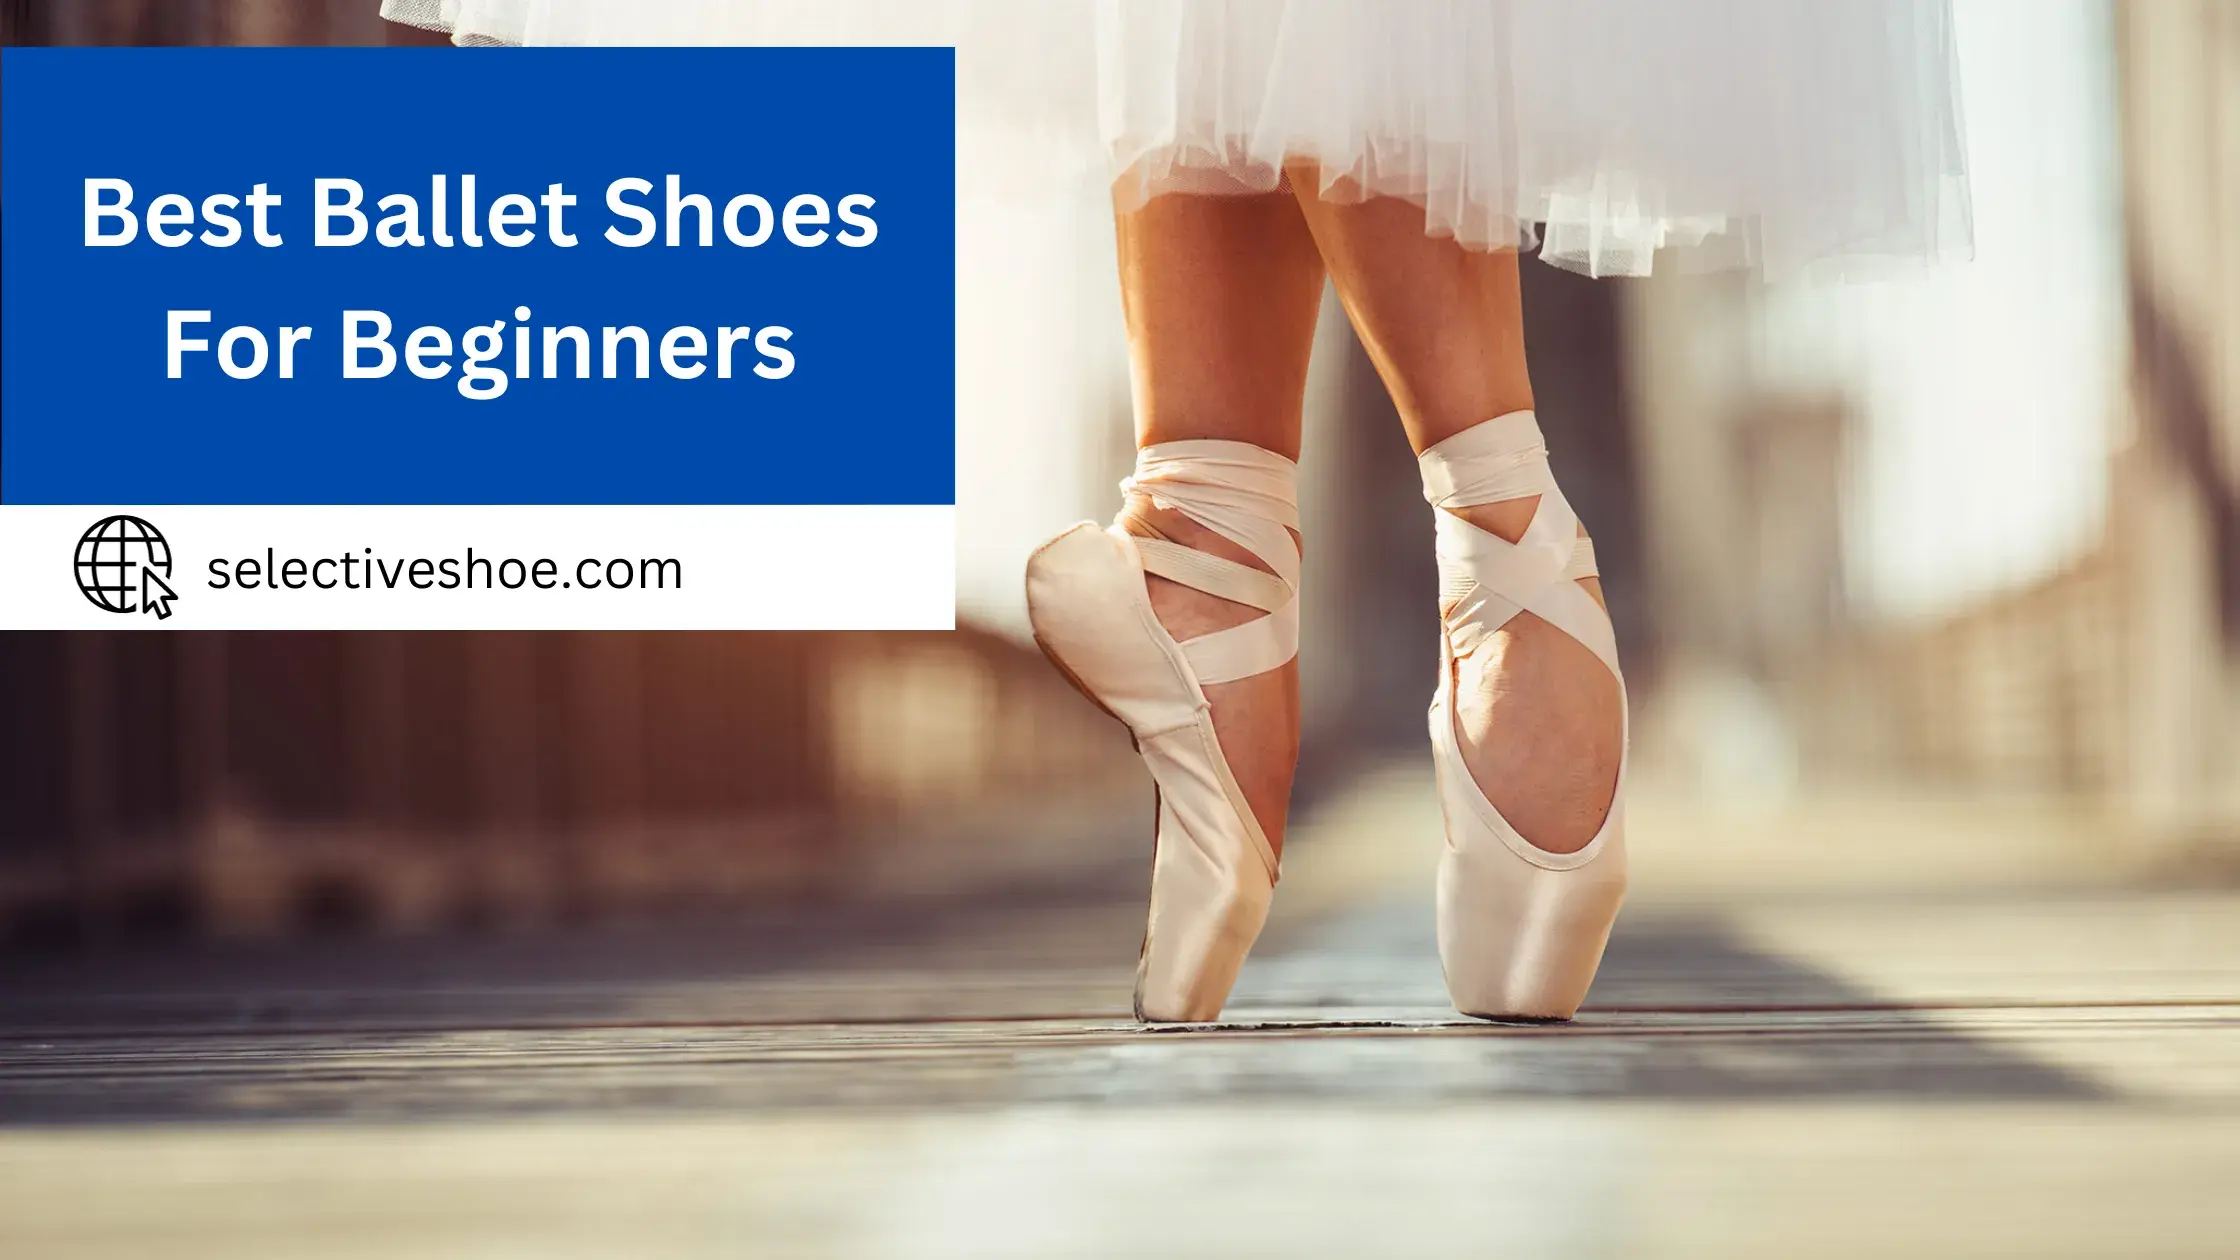 Best Ballet Shoes For Beginners - A Comprehensive Guide